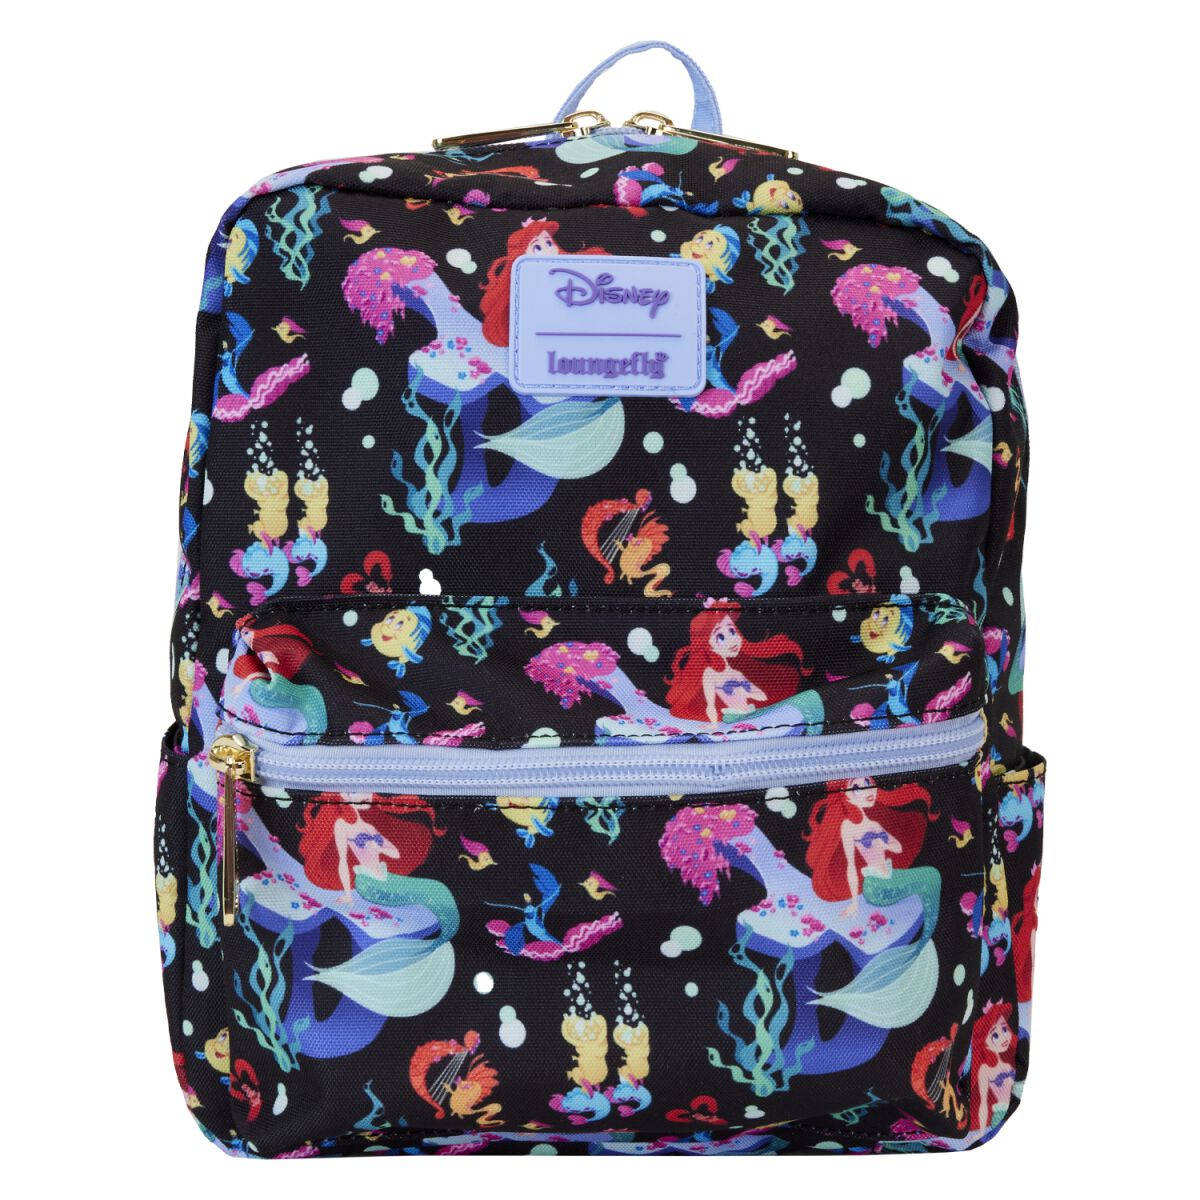 Arielle, die Meerjungfrau Loungefly - 35th Anniversary - Life is the Bubbles Rucksack multicolor